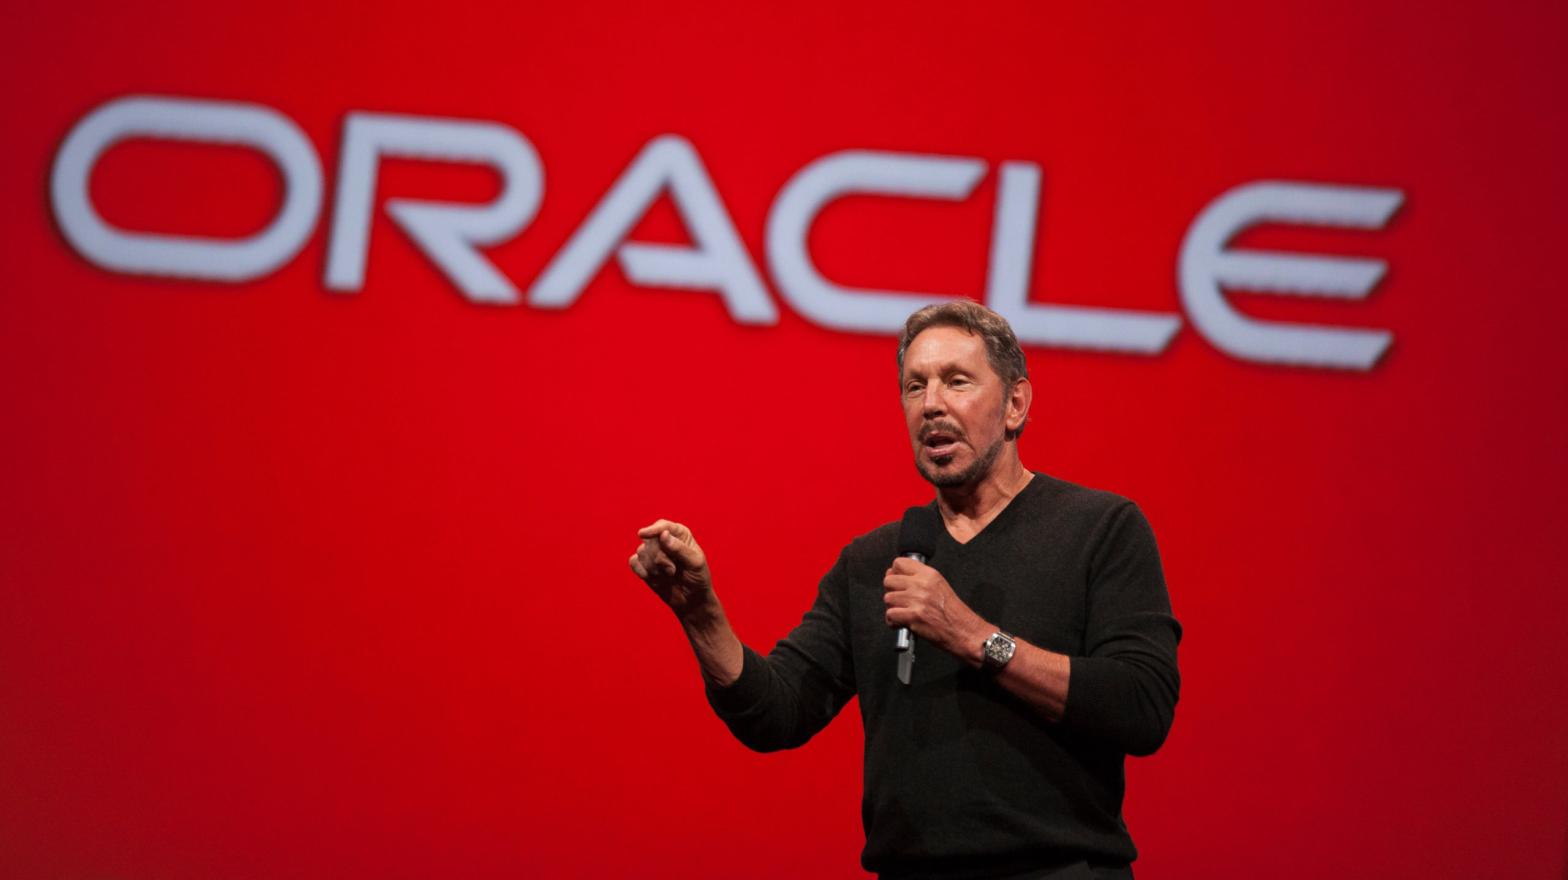 Larry Ellison delivers a keynote address during the 2014 Oracle Open World conference on September 28, 2014 in San Francisco, California. (Photo: Kimberly White, Getty Images)